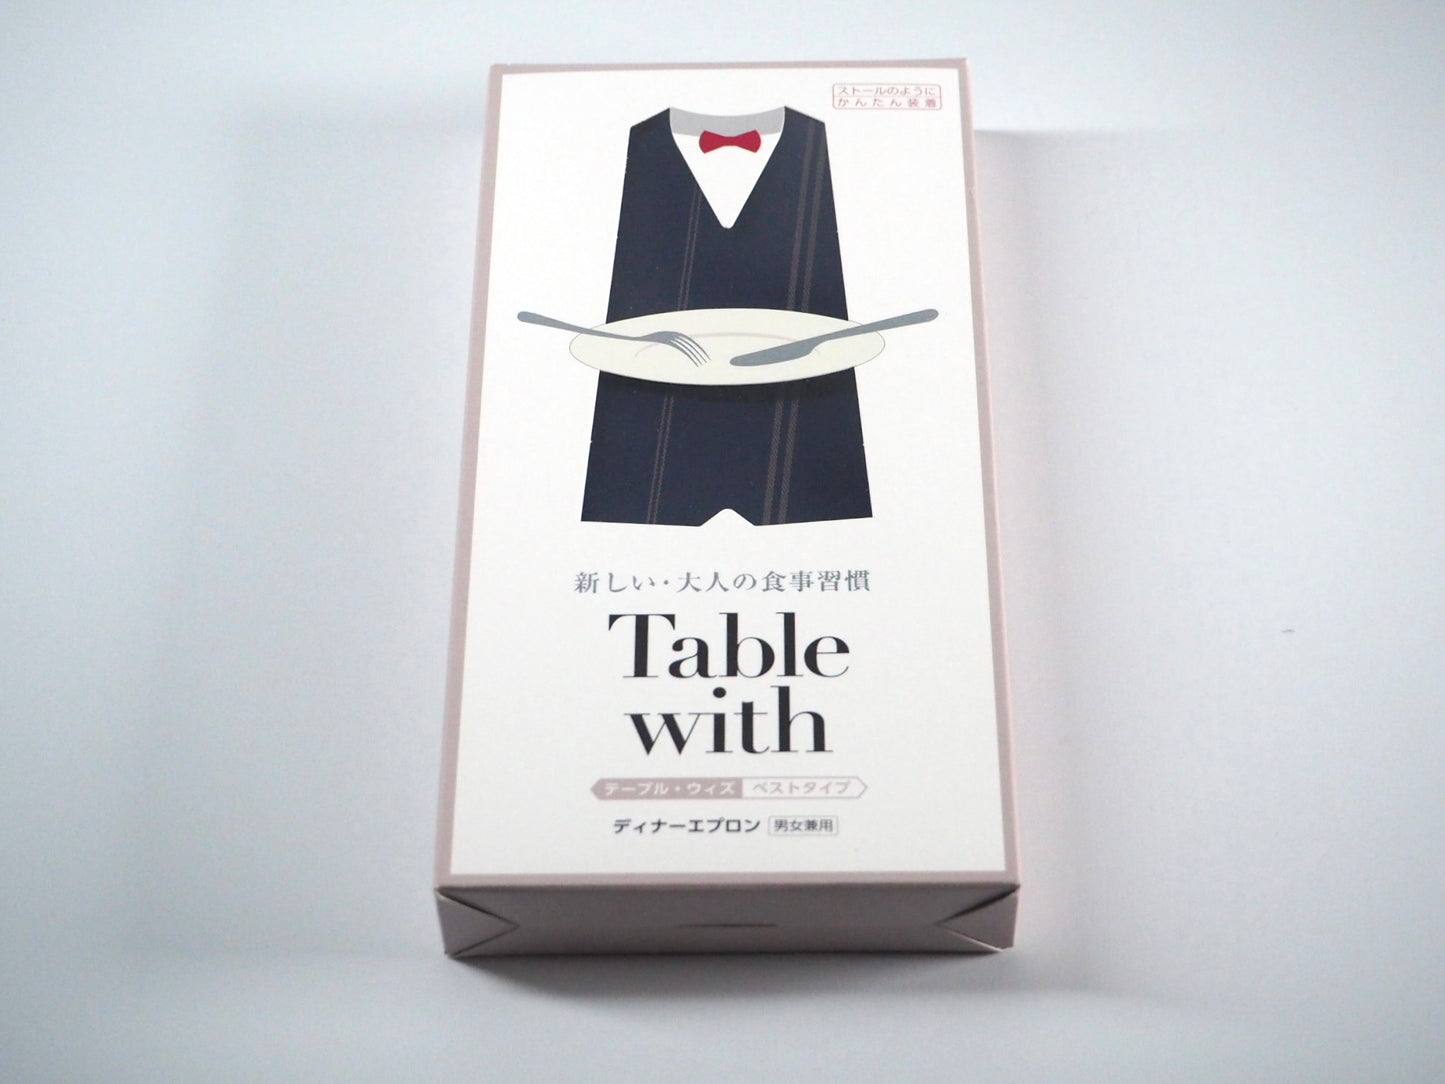 "Table with" vest